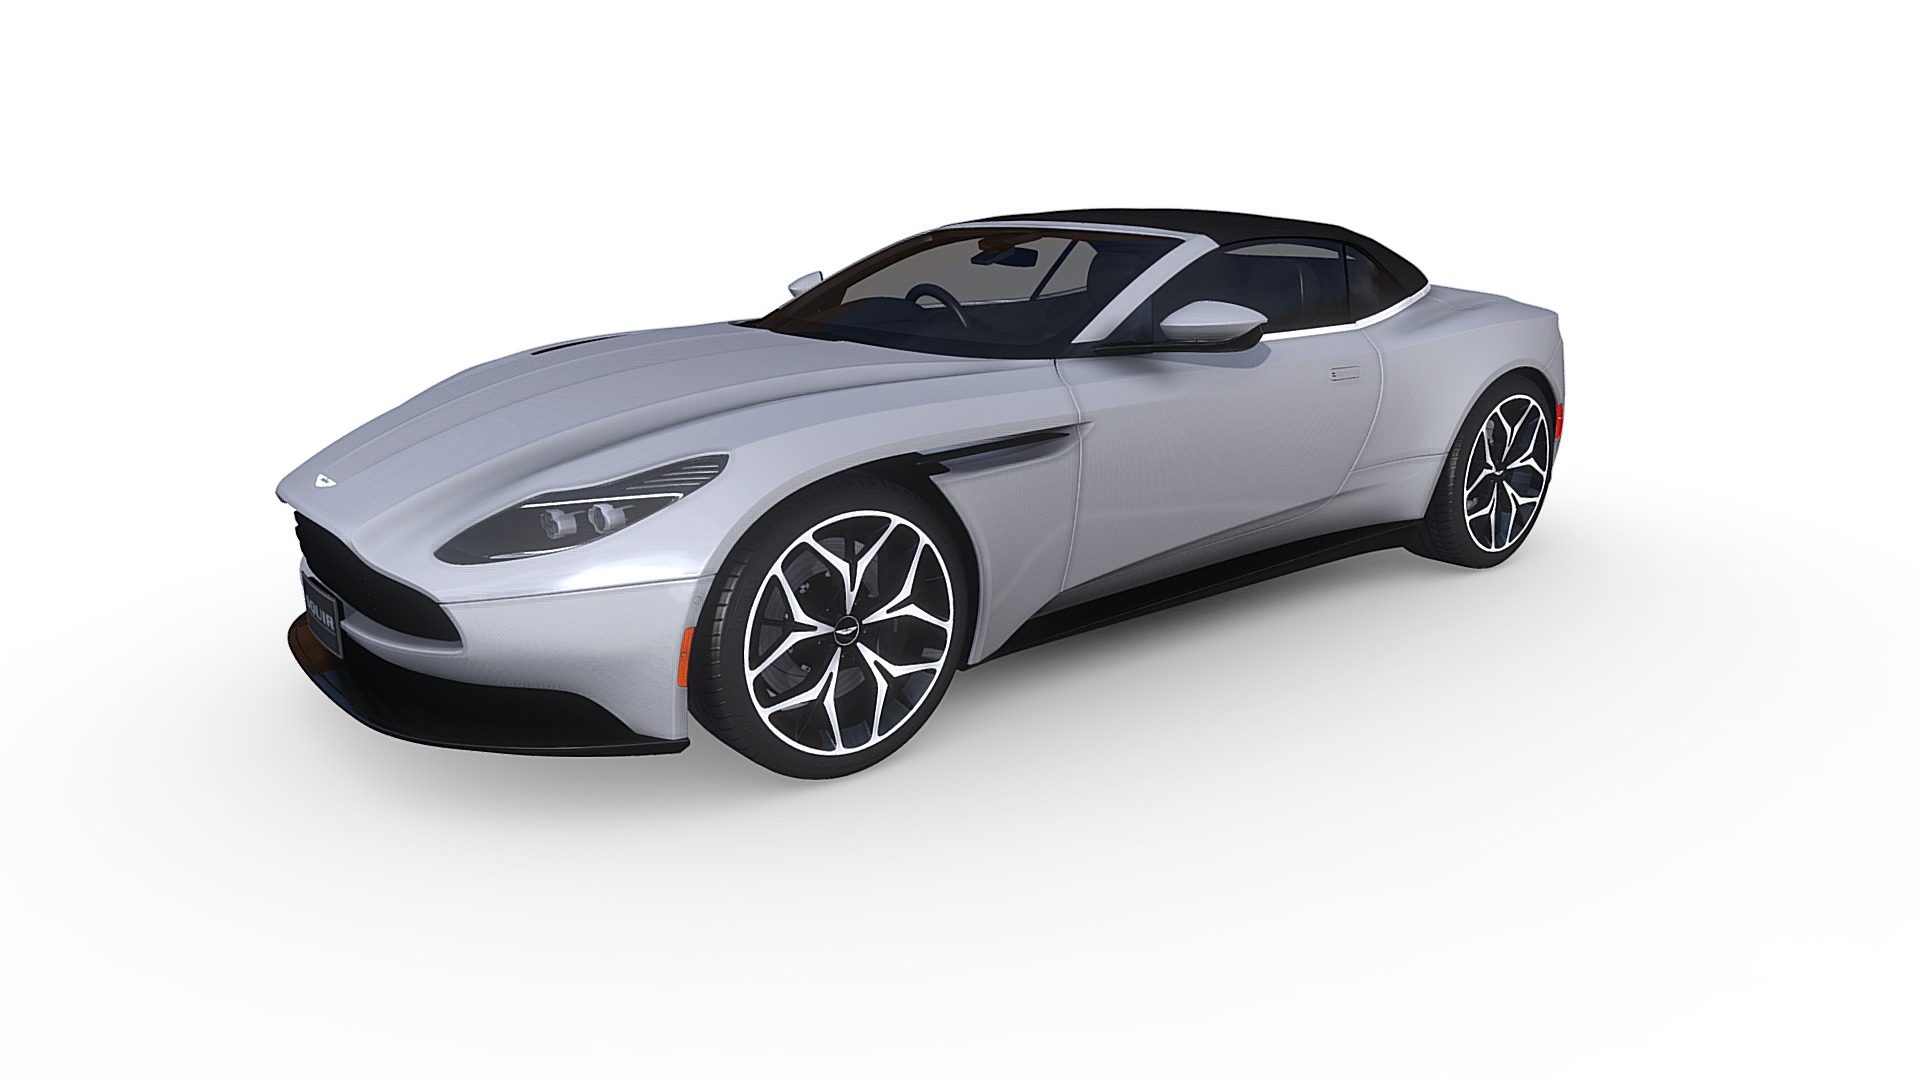 3D model Aston Martin DB11 Volante 2019 - This is a 3D model of the Aston Martin DB11 Volante 2019. The 3D model is about a silver sports car.